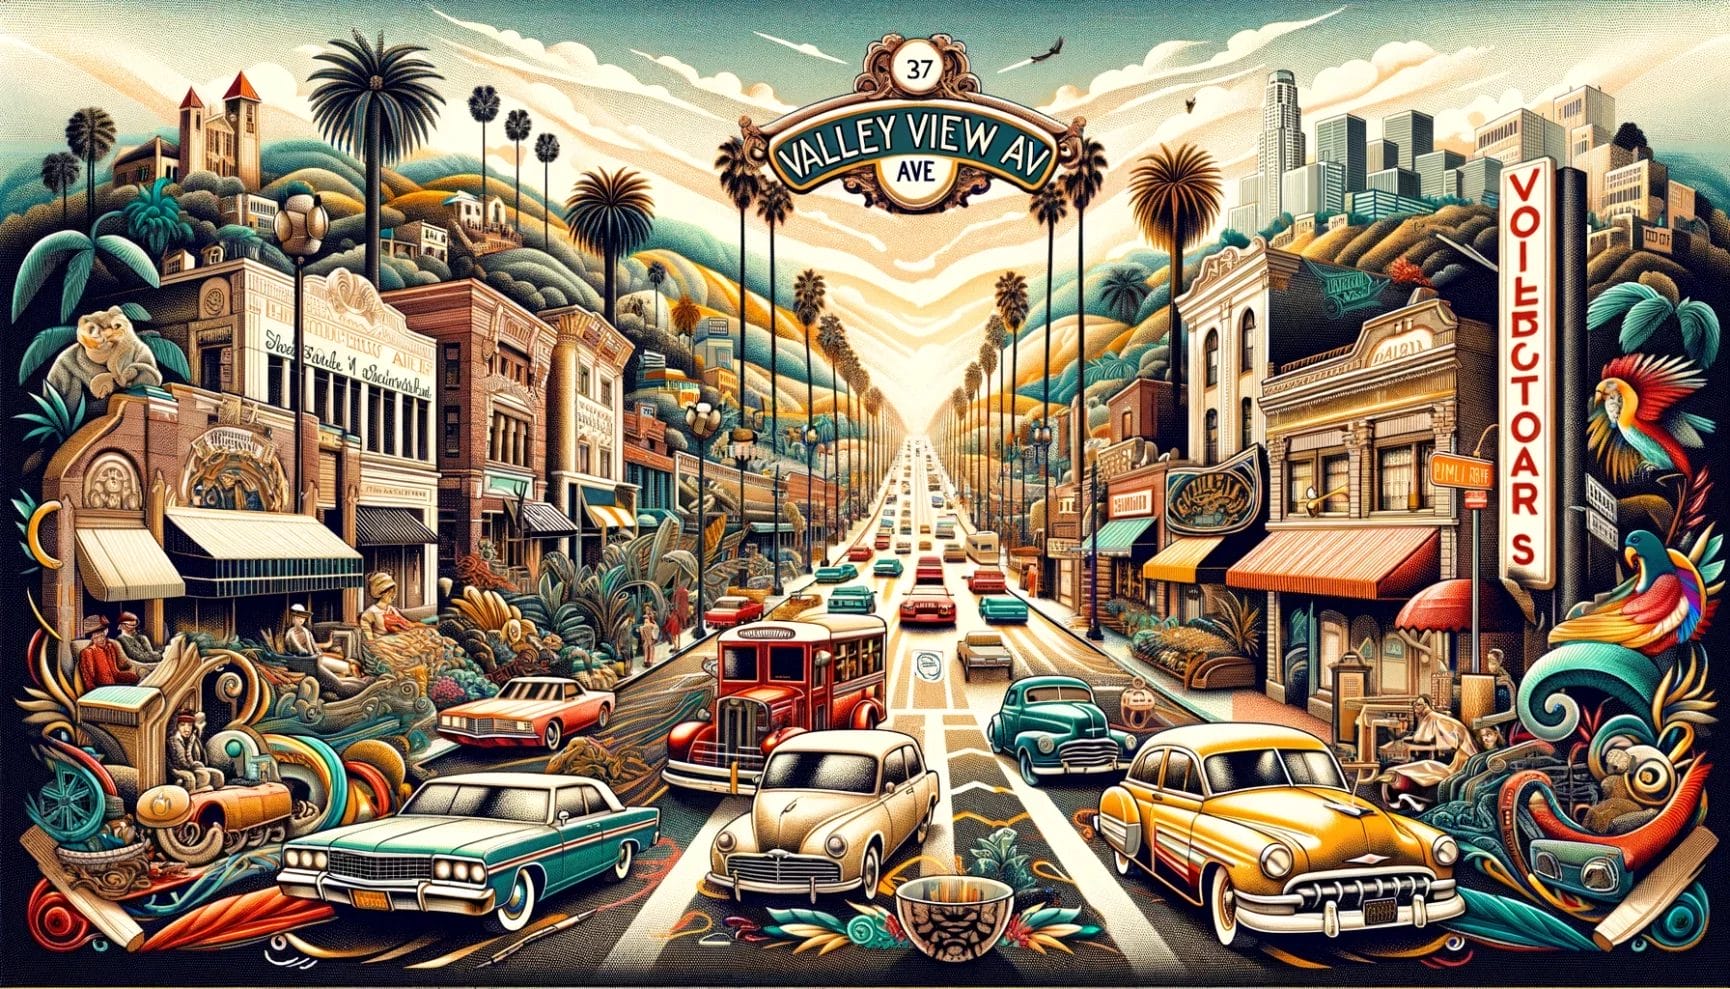 A vibrant, stylized illustration of a retro-themed street scene with classic cars and iconic hollywood imagery, featuring lush surroundings and a dynamic color palette.